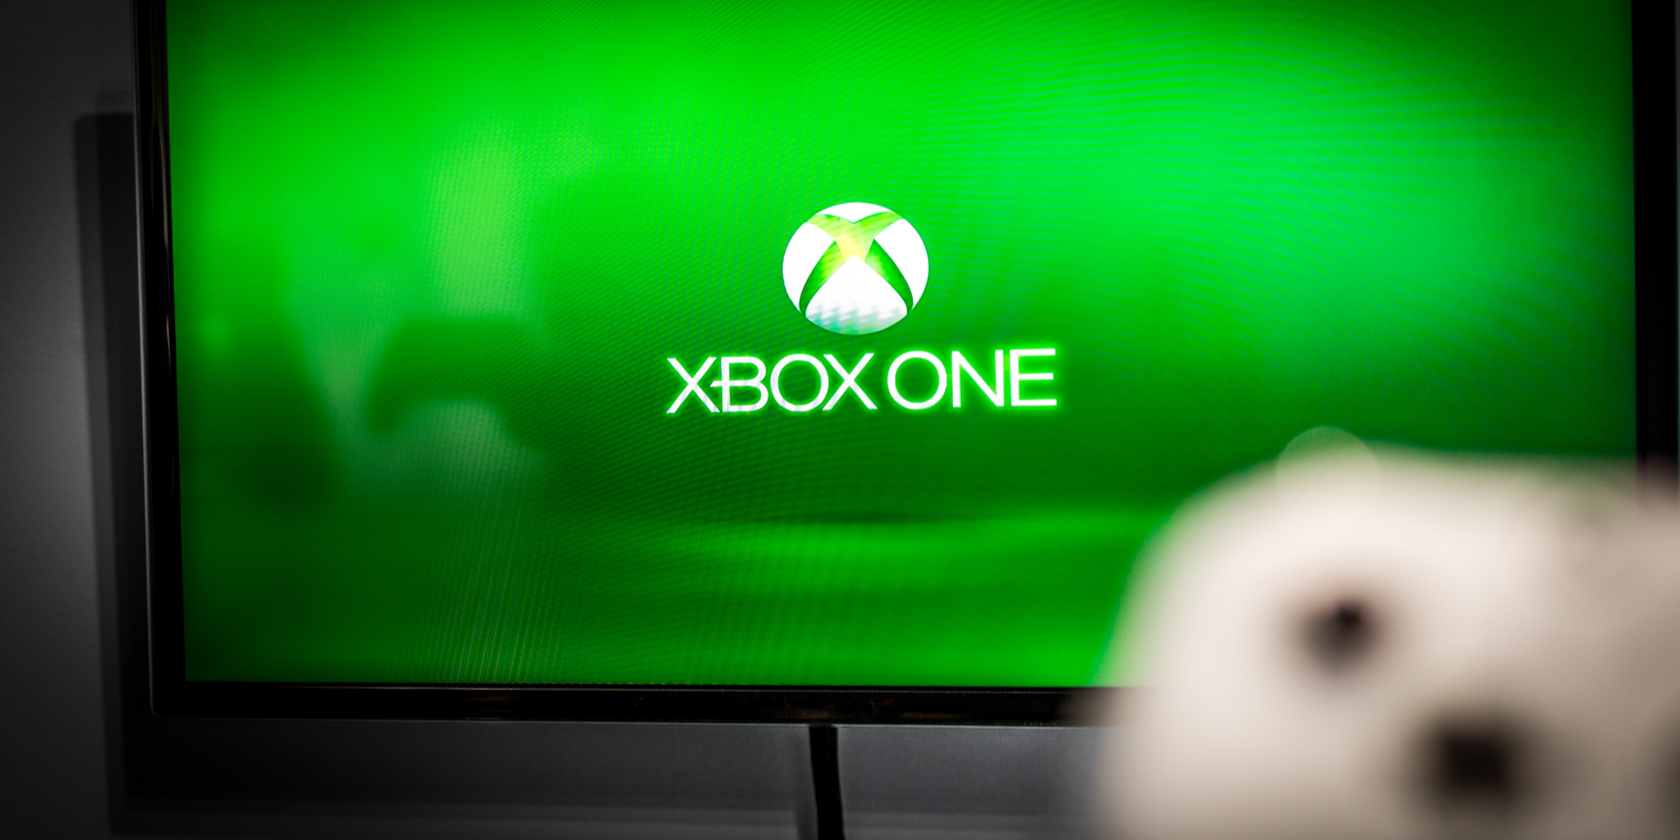 Onnauwkeurig Controverse bekken How to Fix an Xbox One That Won't Connect to Wi-Fi